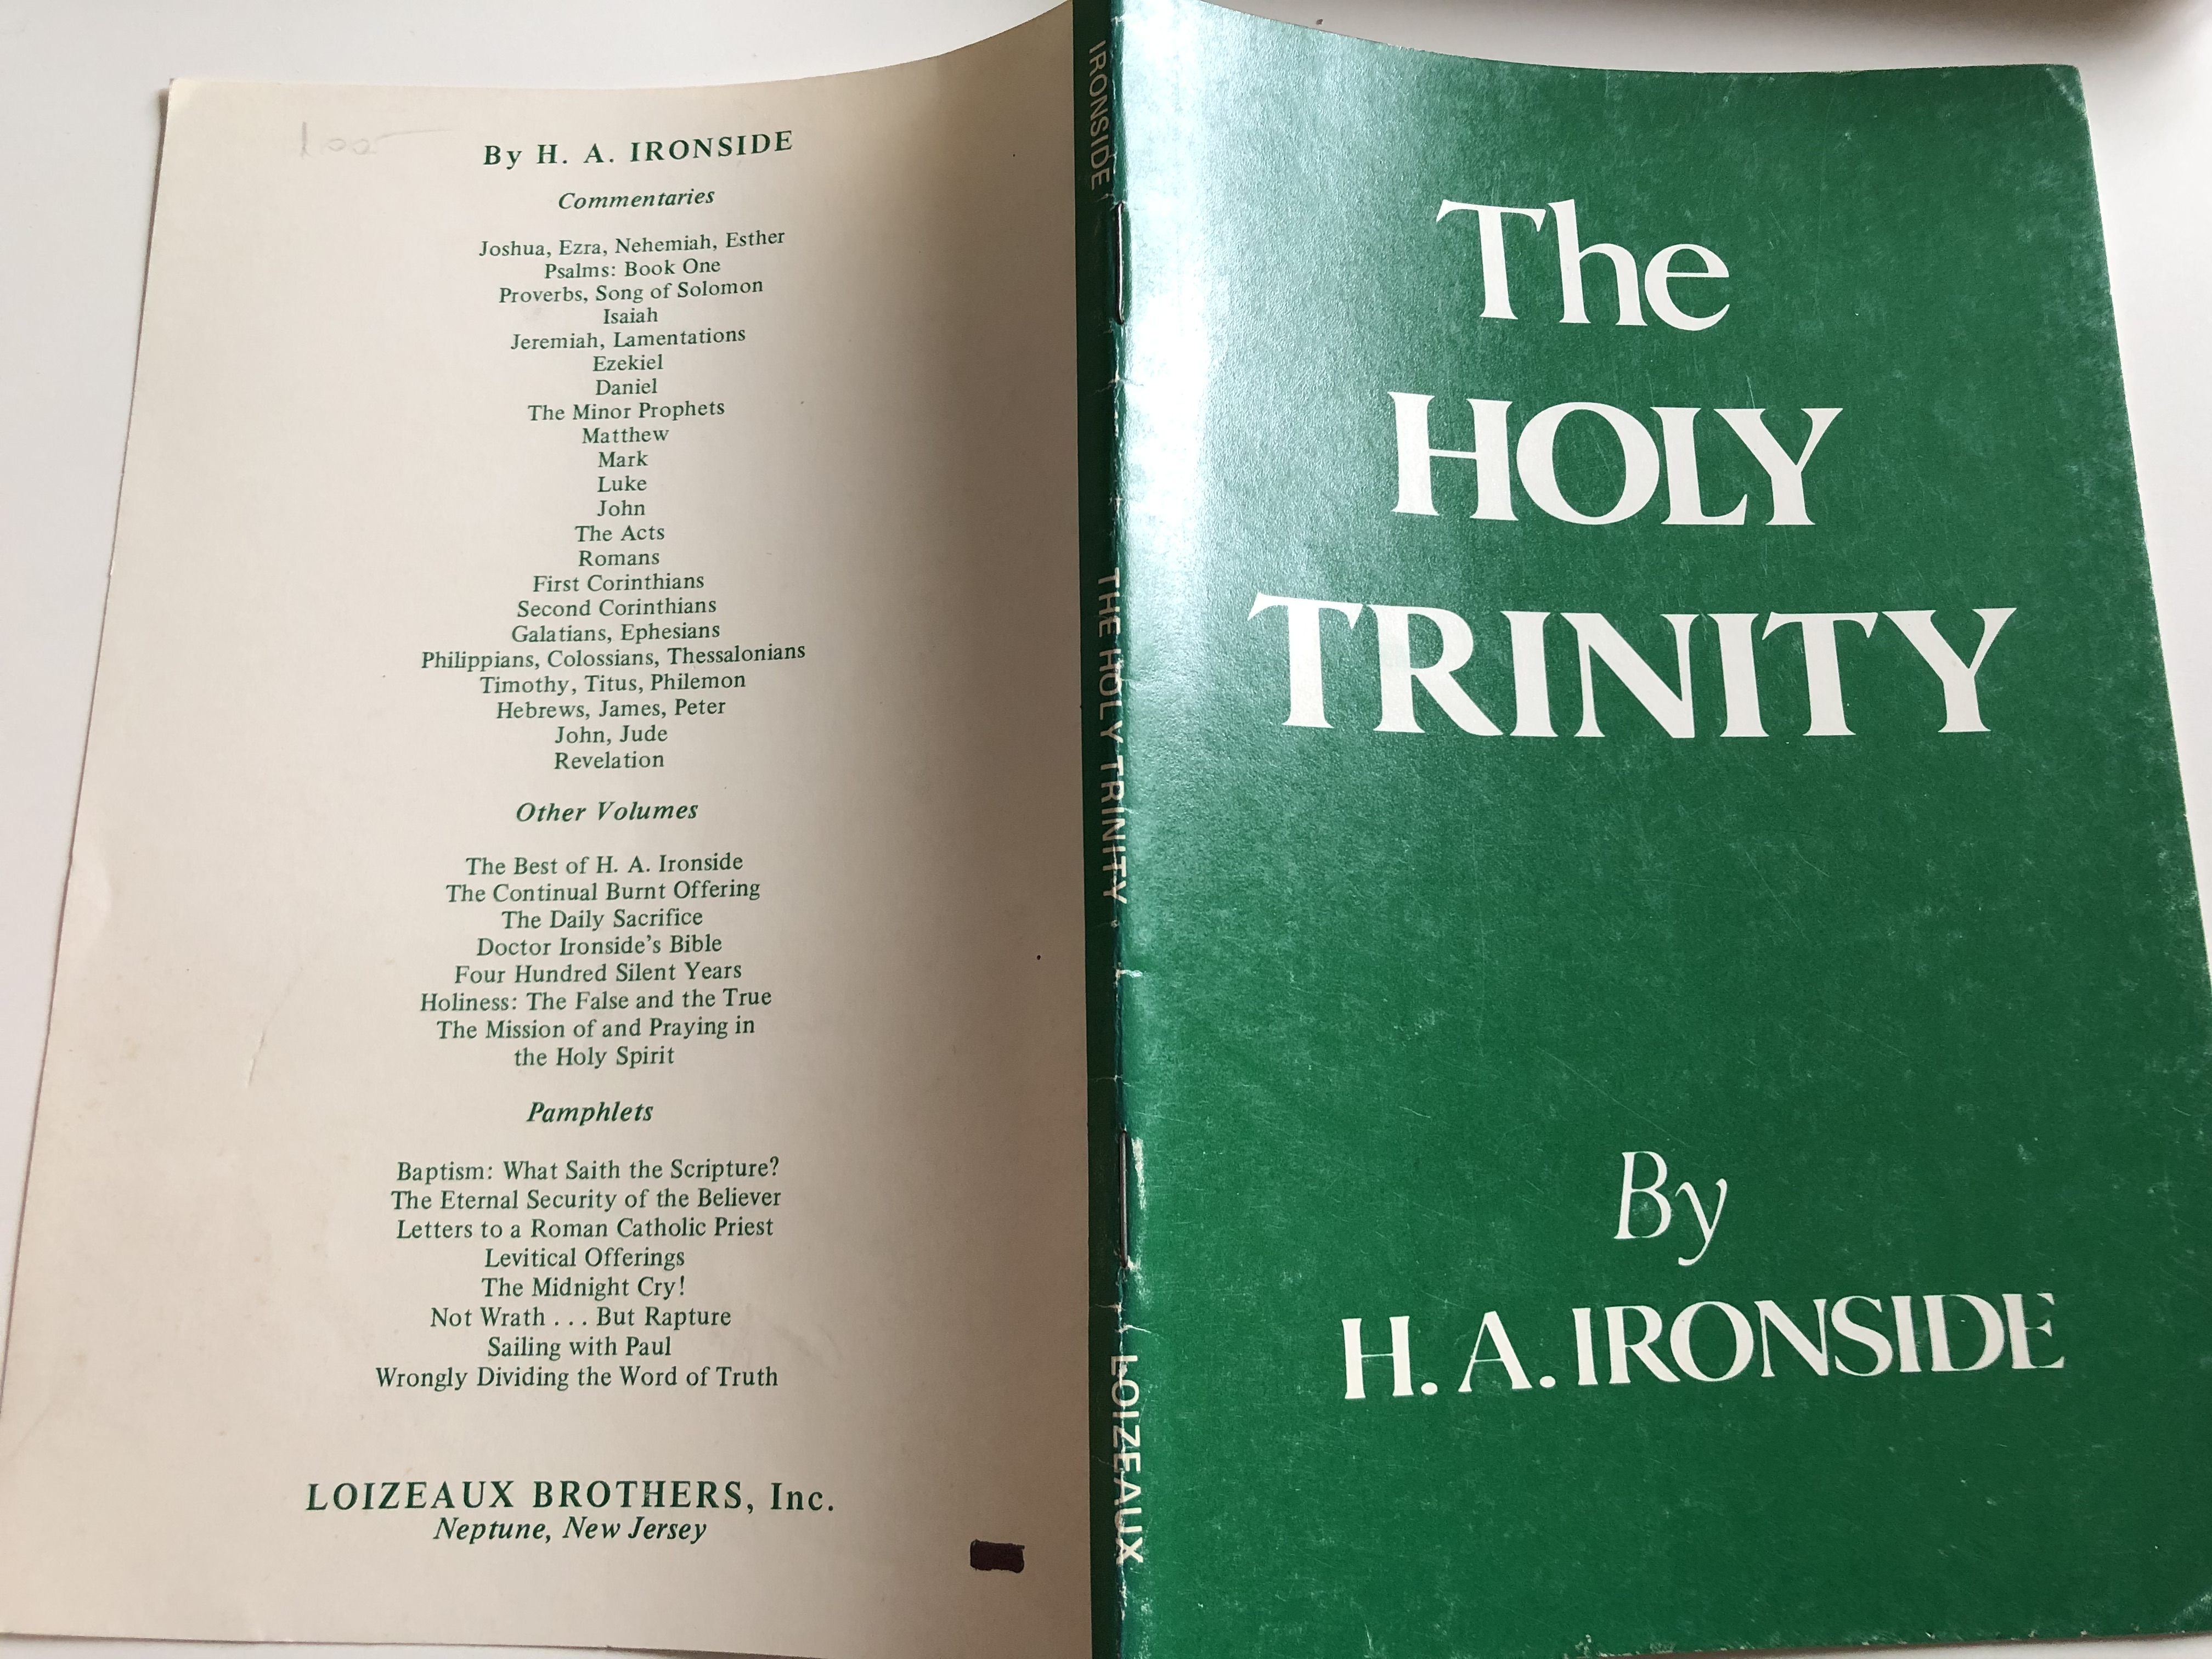 the-holy-trinity-by-henry-allen-ironside-a-brief-but-thorough-examination-of-the-holy-trinity-loizeaux-brothers-1988-paperback-5-.jpg